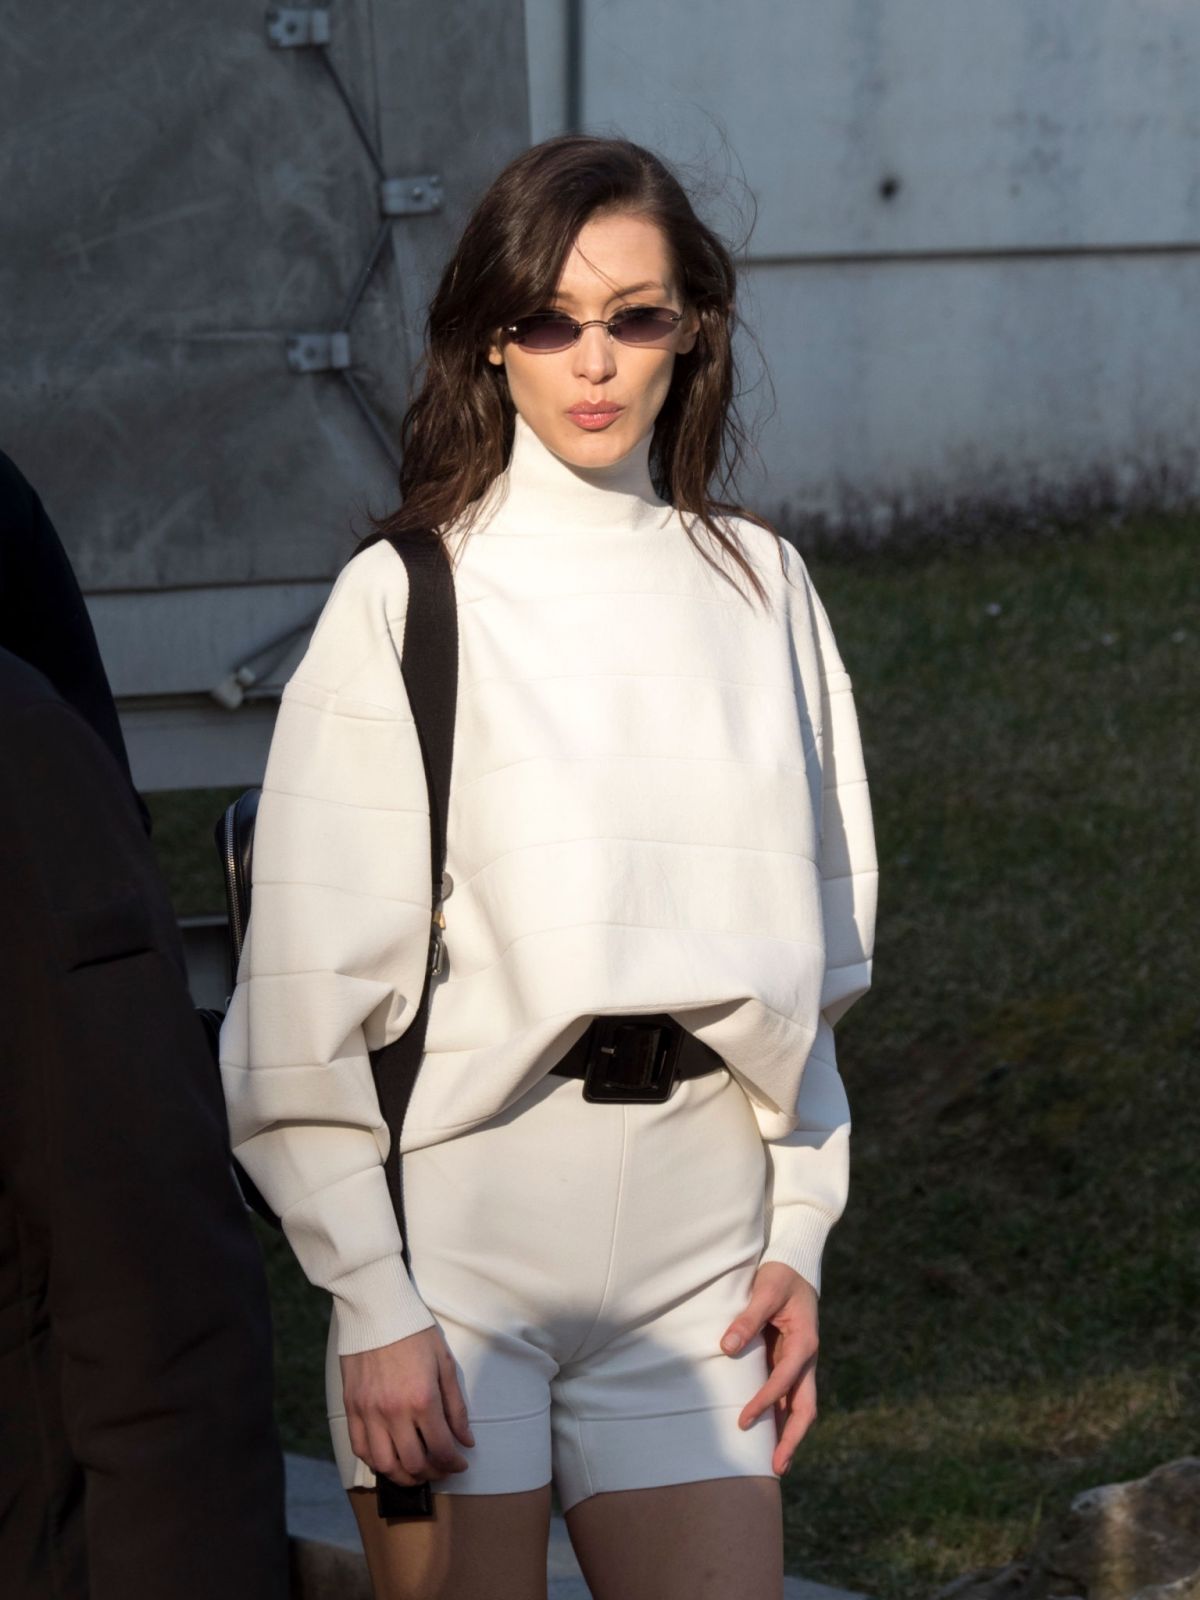 bella-hadid-out-and-about-in-milan-02-23-2019-7.jpg